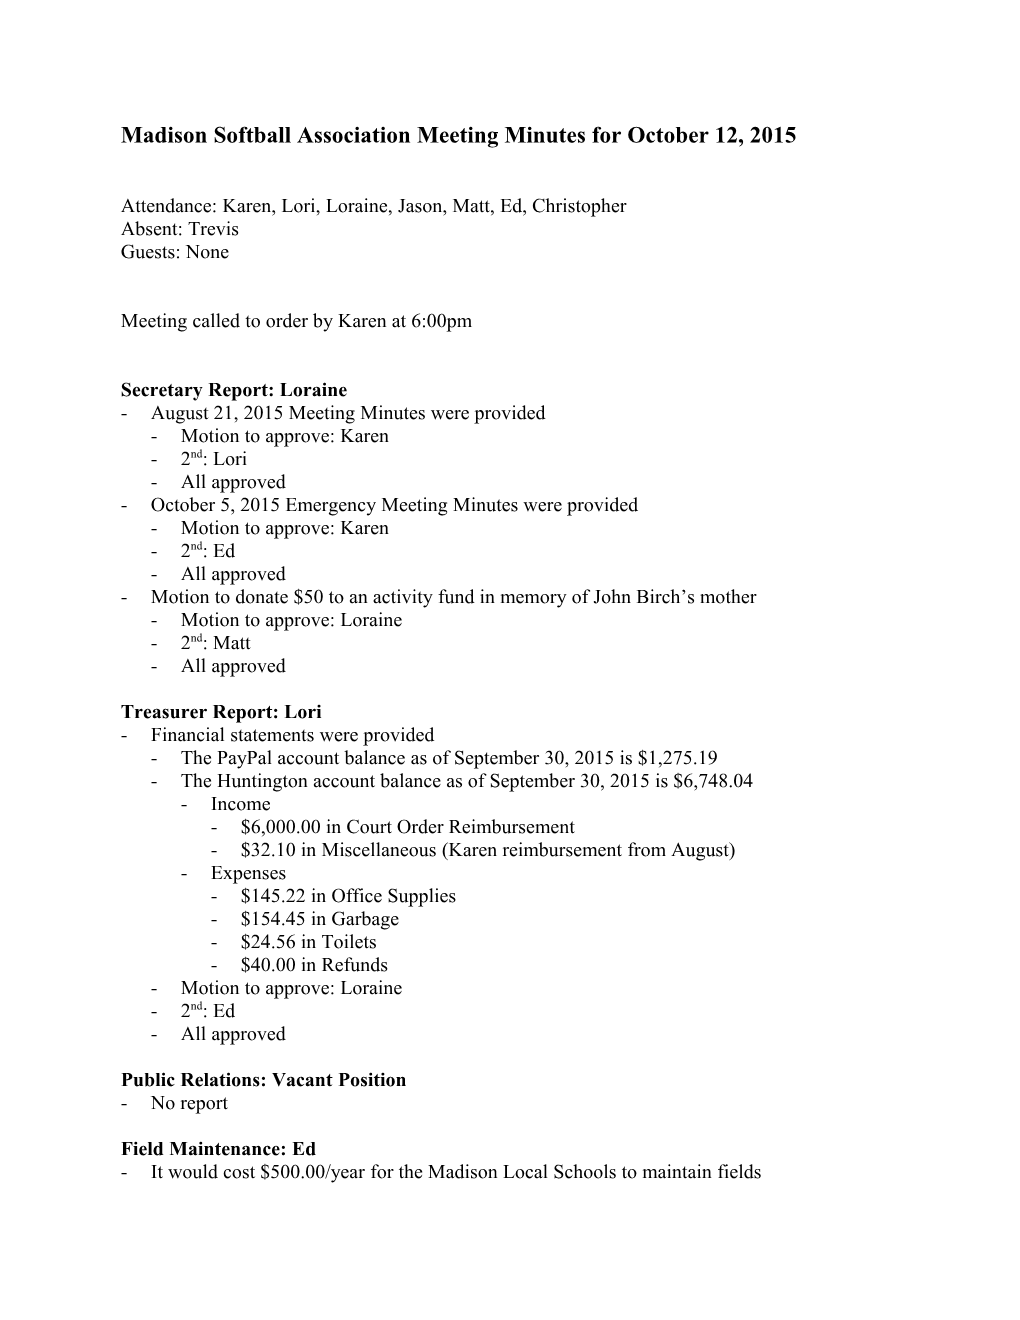 Madison Softball Association Meeting Minutes for February 24, 2014